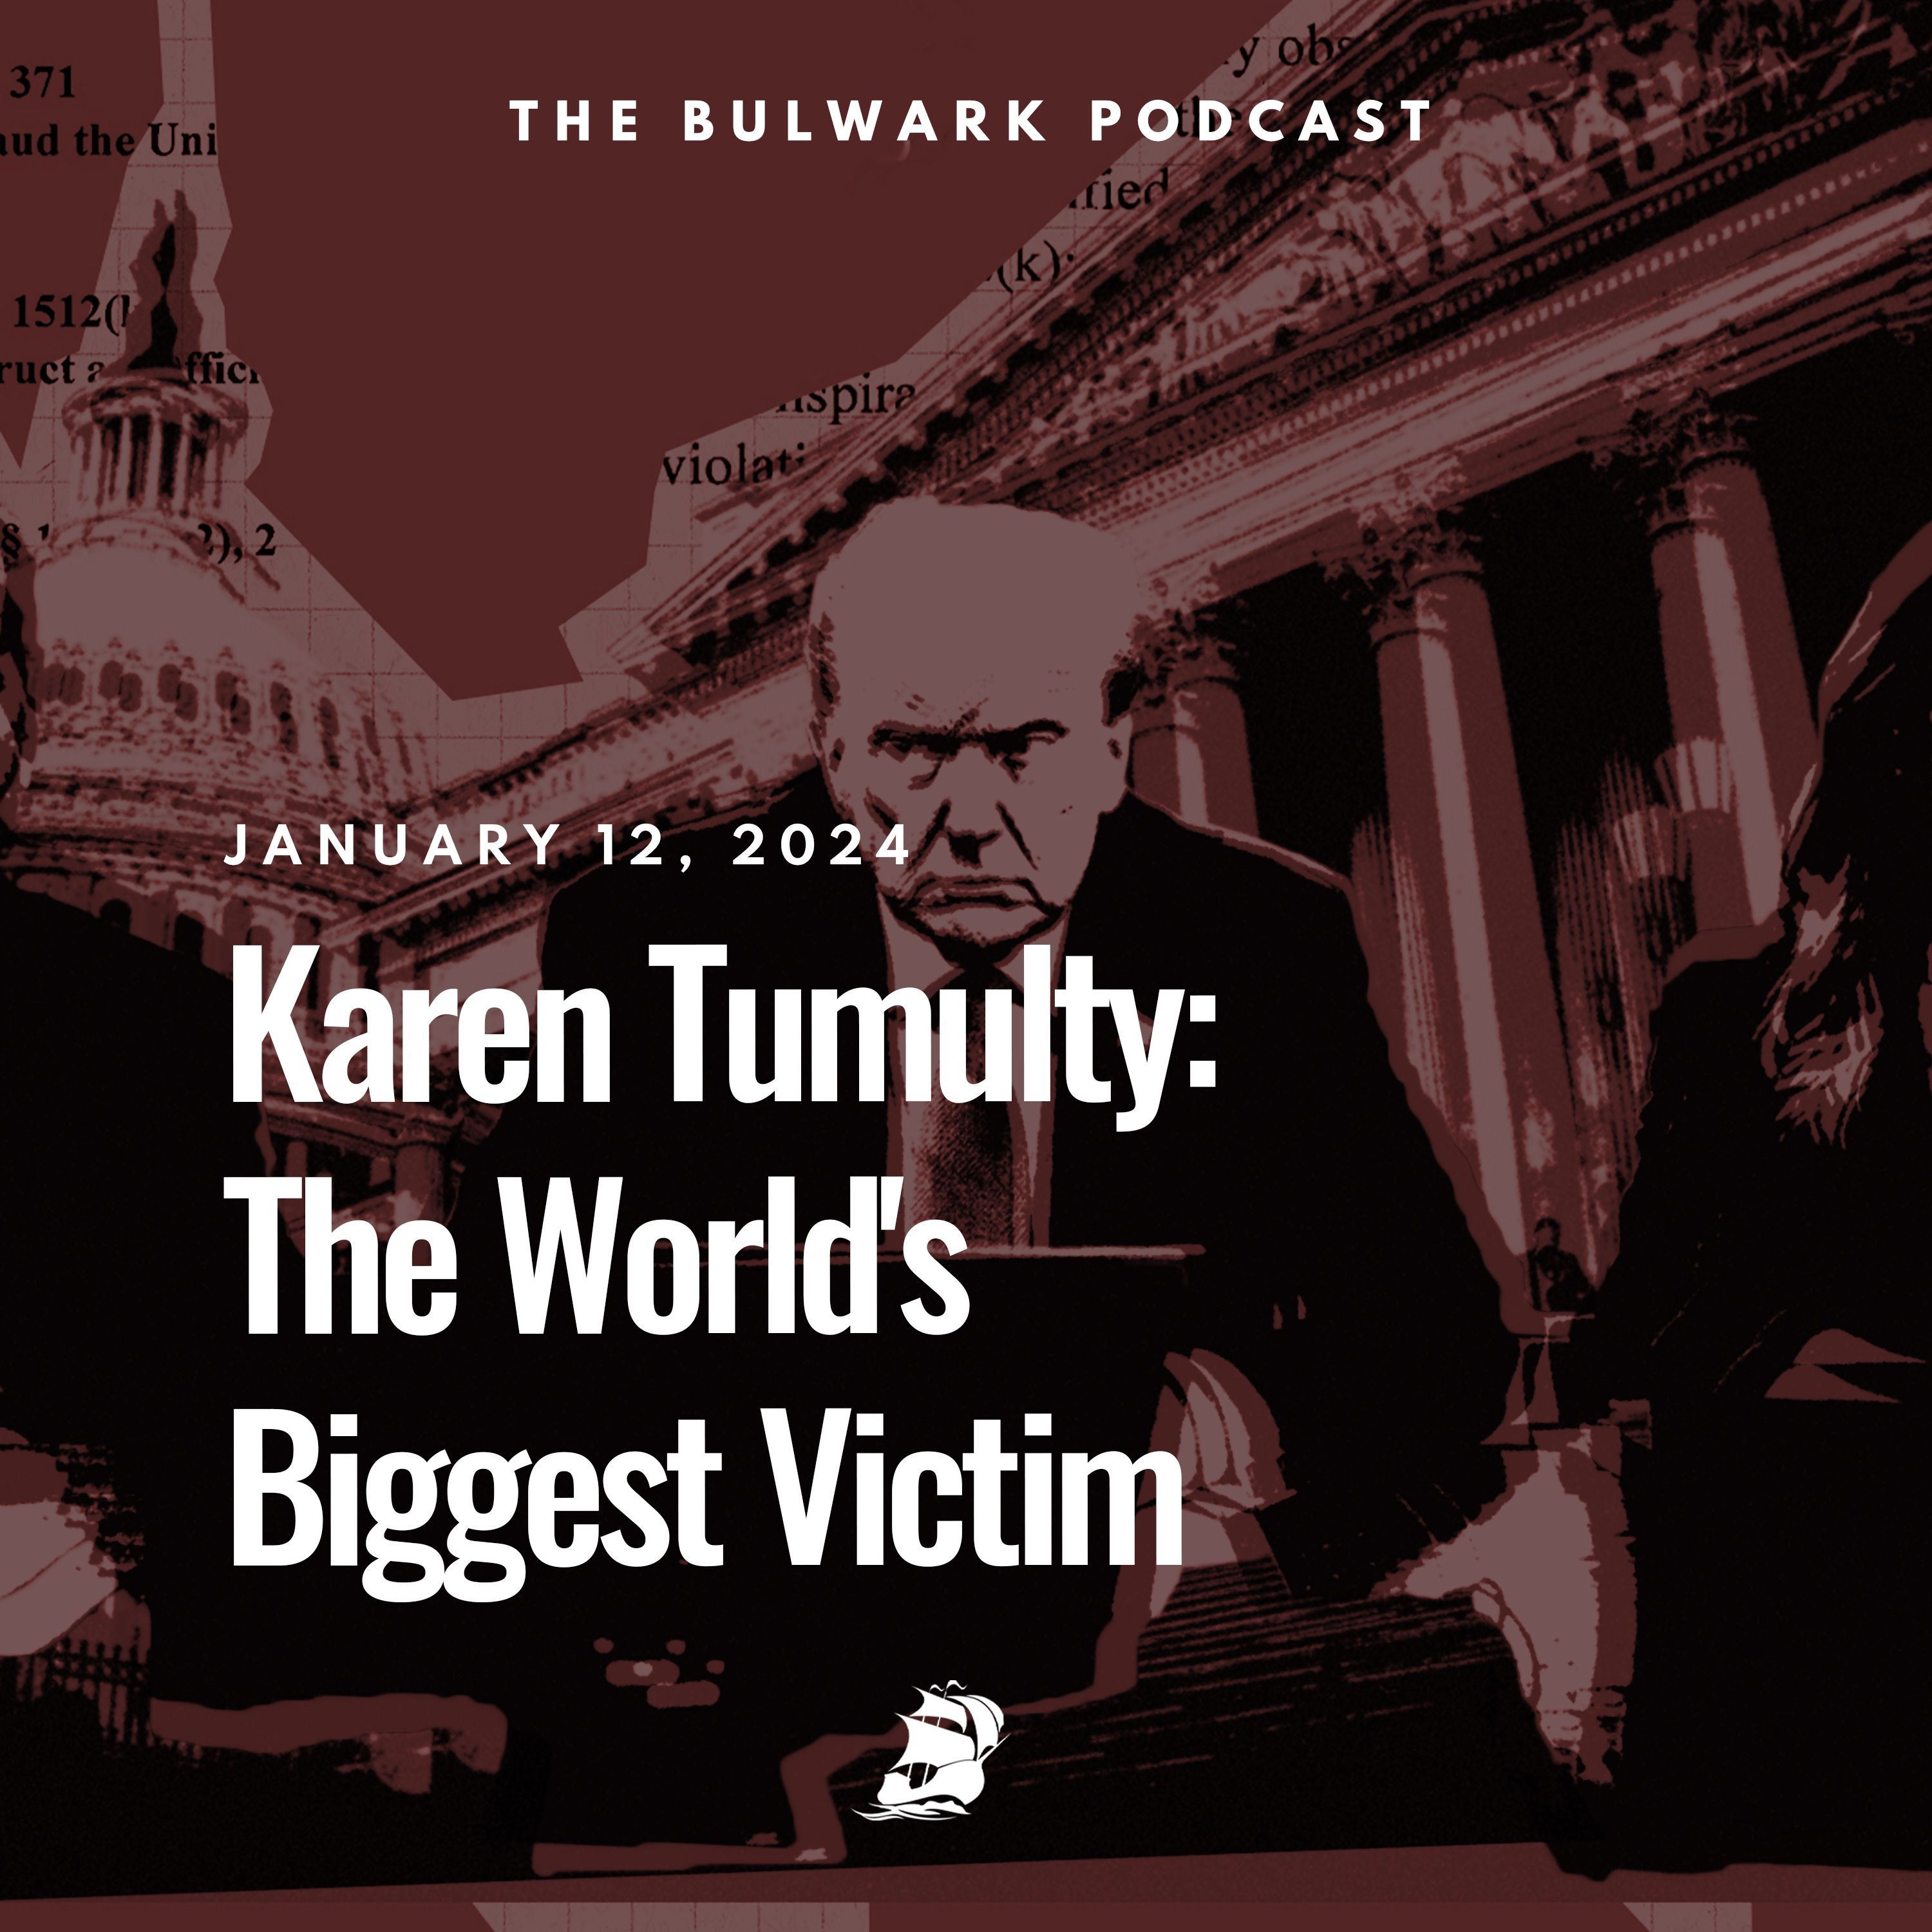 Karen Tumulty: The World's Biggest Victim by The Bulwark Podcast